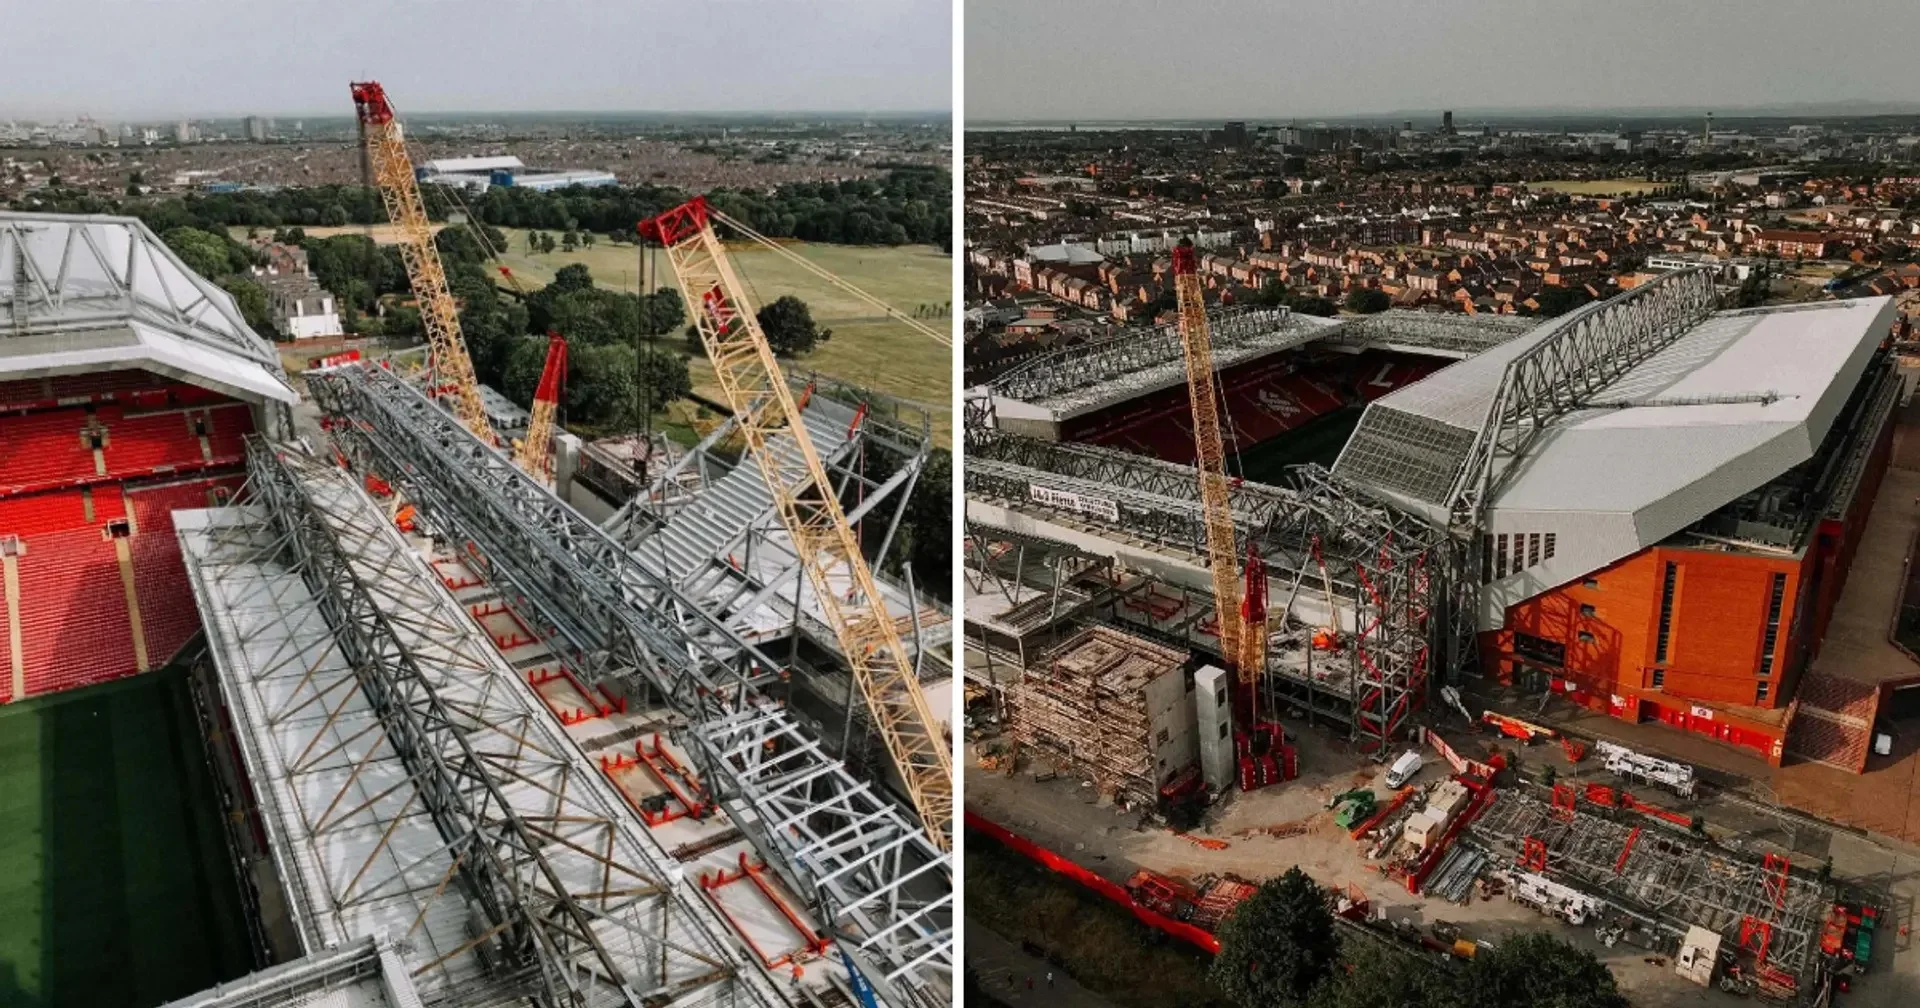 Anfield Road expansion project reaches 'milestone' with 300-tonne roof installation: Images and video of work